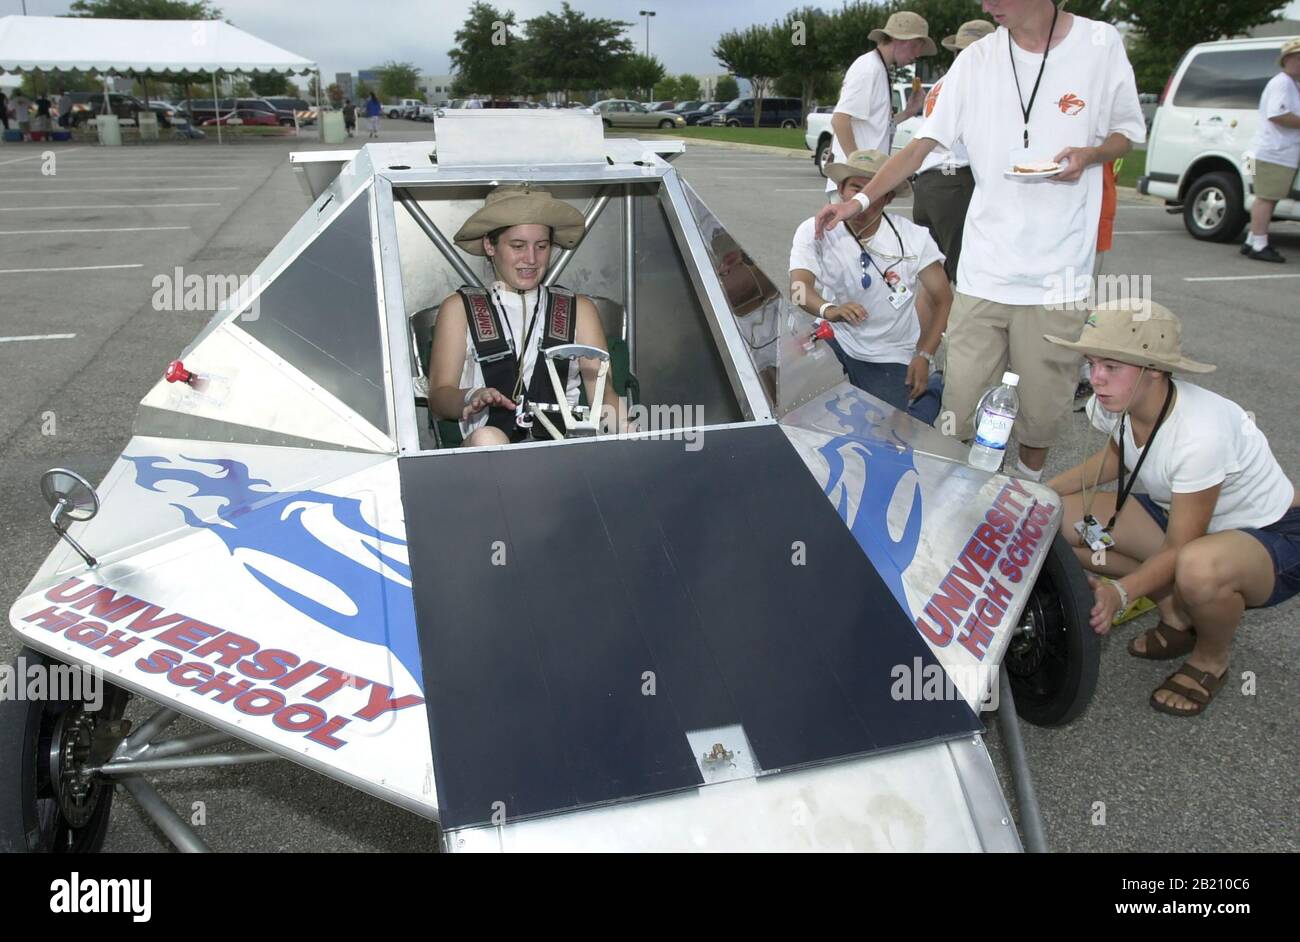 July 16, 2001, Round Rock, Texas: Solar car designed and built by high school students from Irvine, CA, prepares for the start the Winston Solar Challenge race at the Dell Computer headquarters north of Austin. The nine-day Winston Solar Challenge ends in Columbus, Indiana and features teams from Texas, Mississippi, California, Indiana, South Carolina, Puerto Rico and Mexico. ©Bob Daemmrich Stock Photo